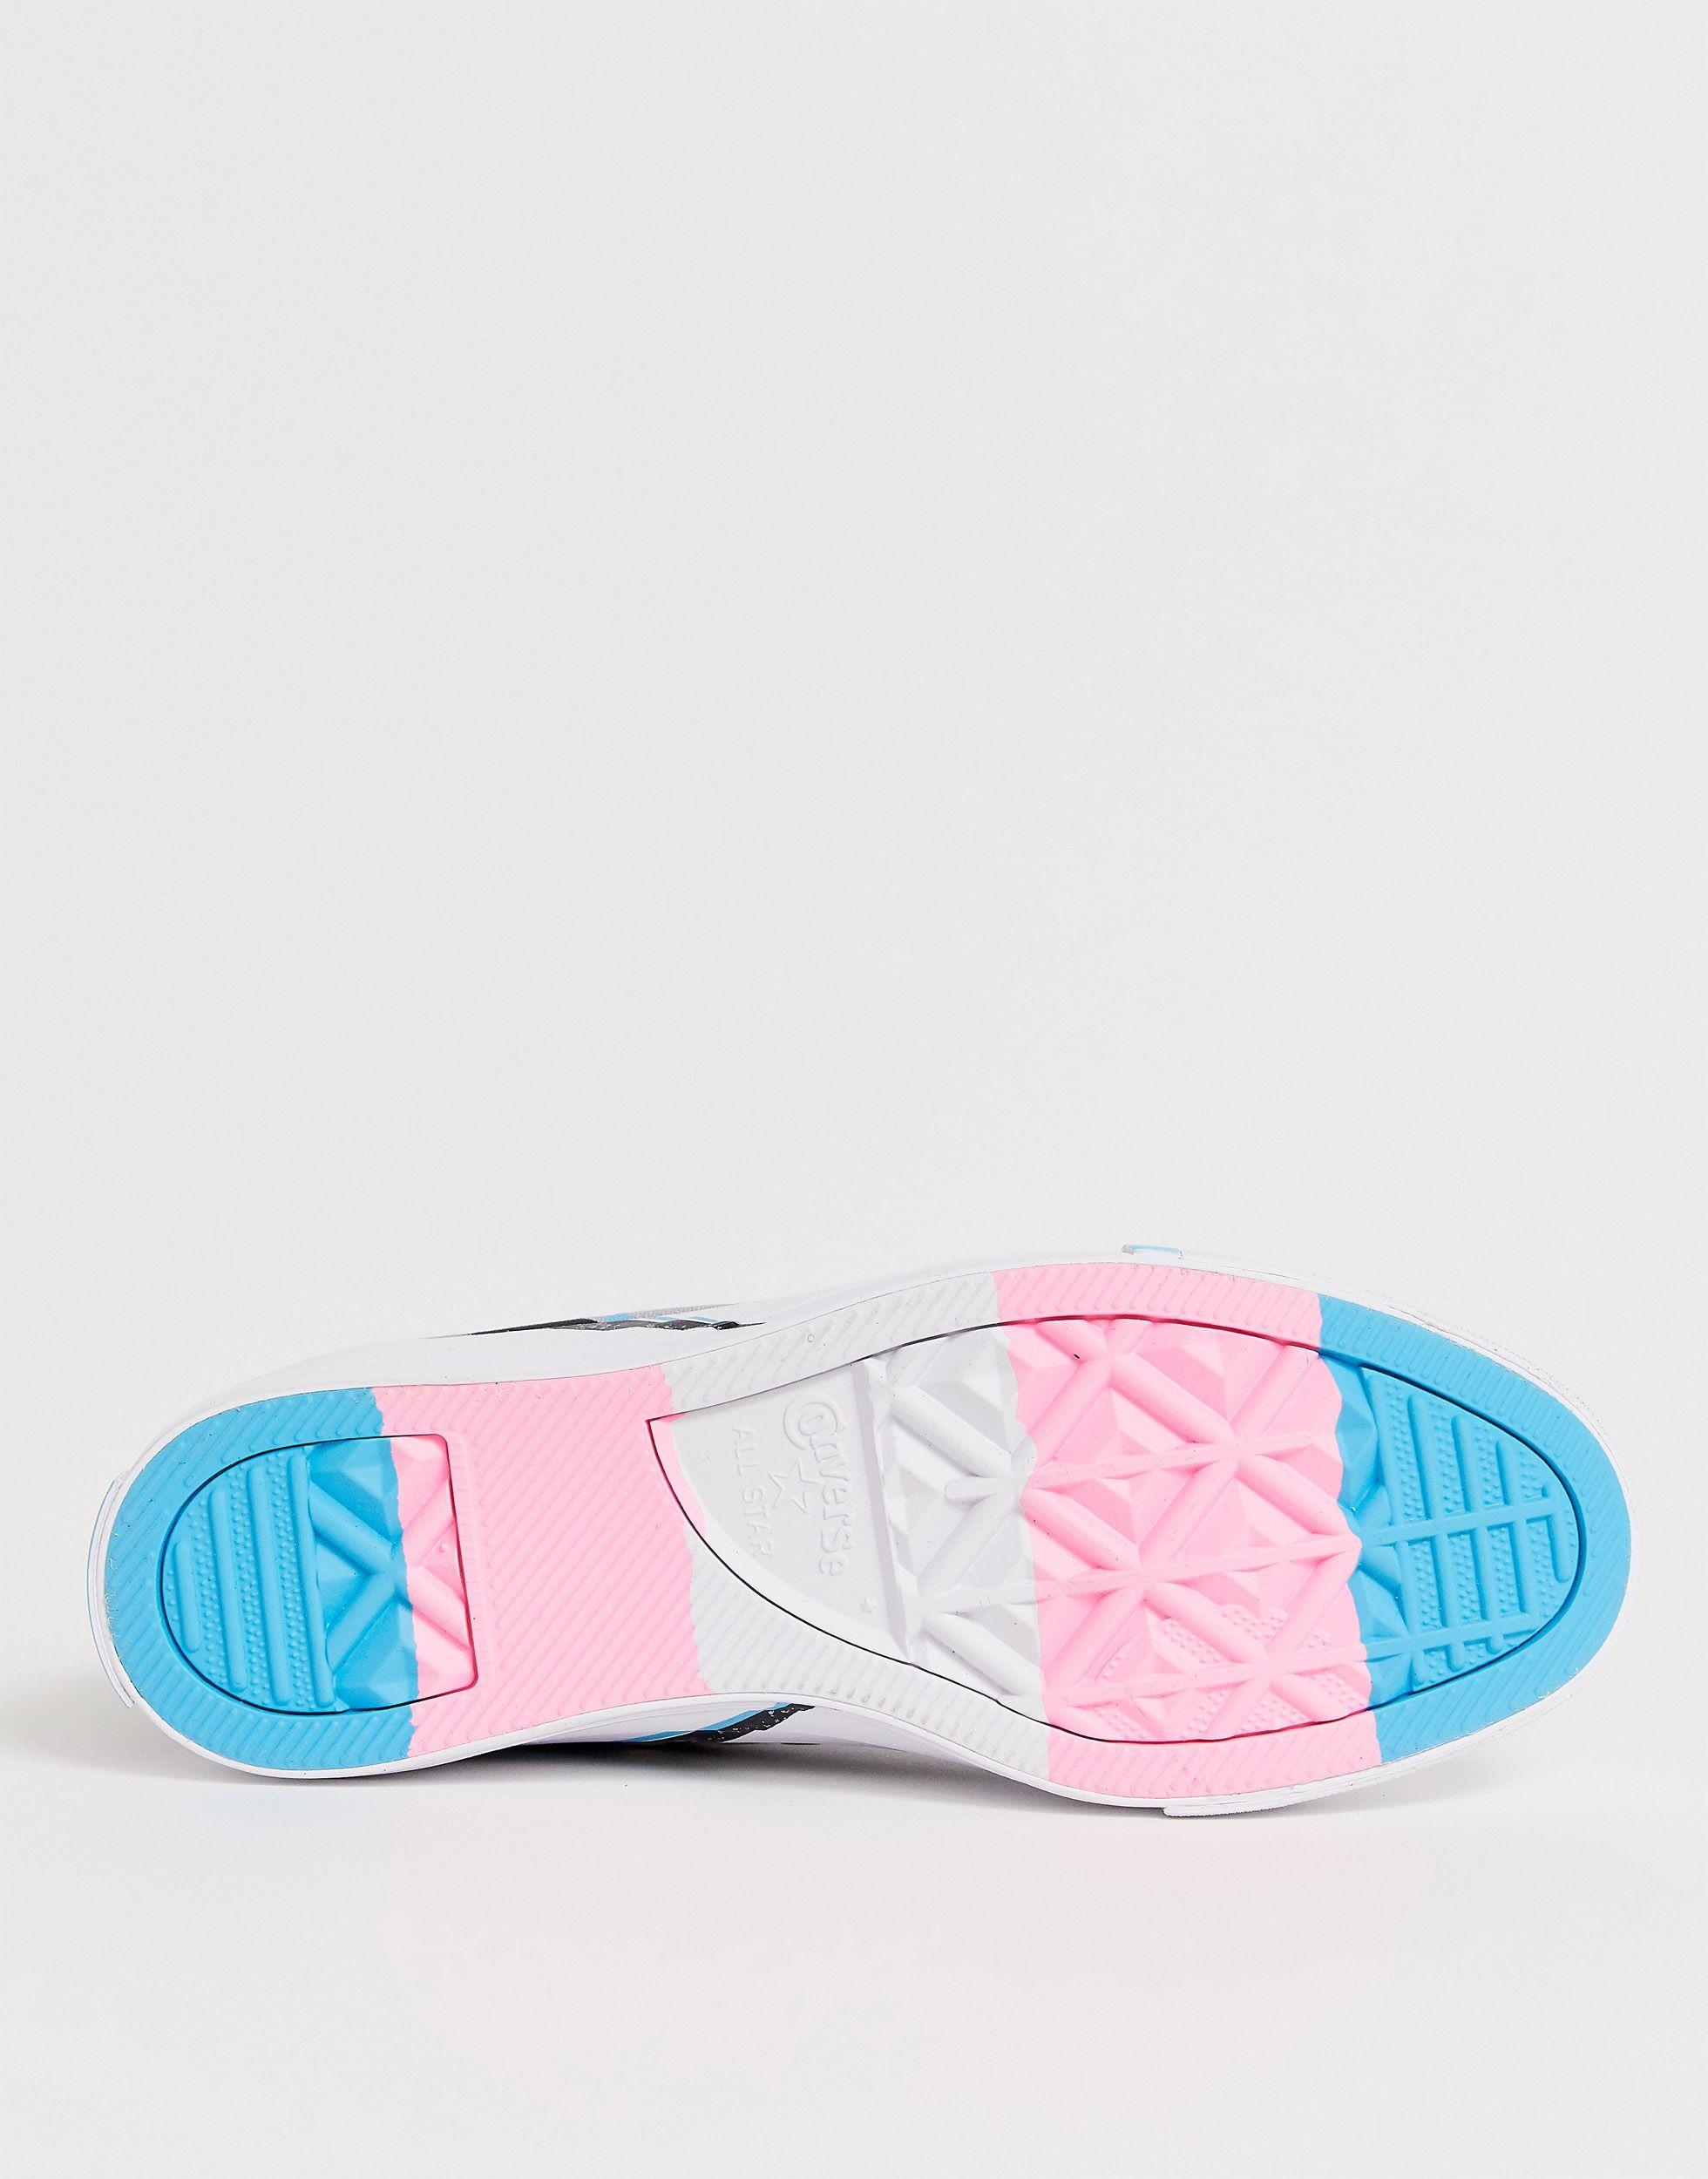 Converse Lace Pride Chuck Taylor Hi All Star Blue And Pink Lightening Bolt  Trainers in Gray | Lyst